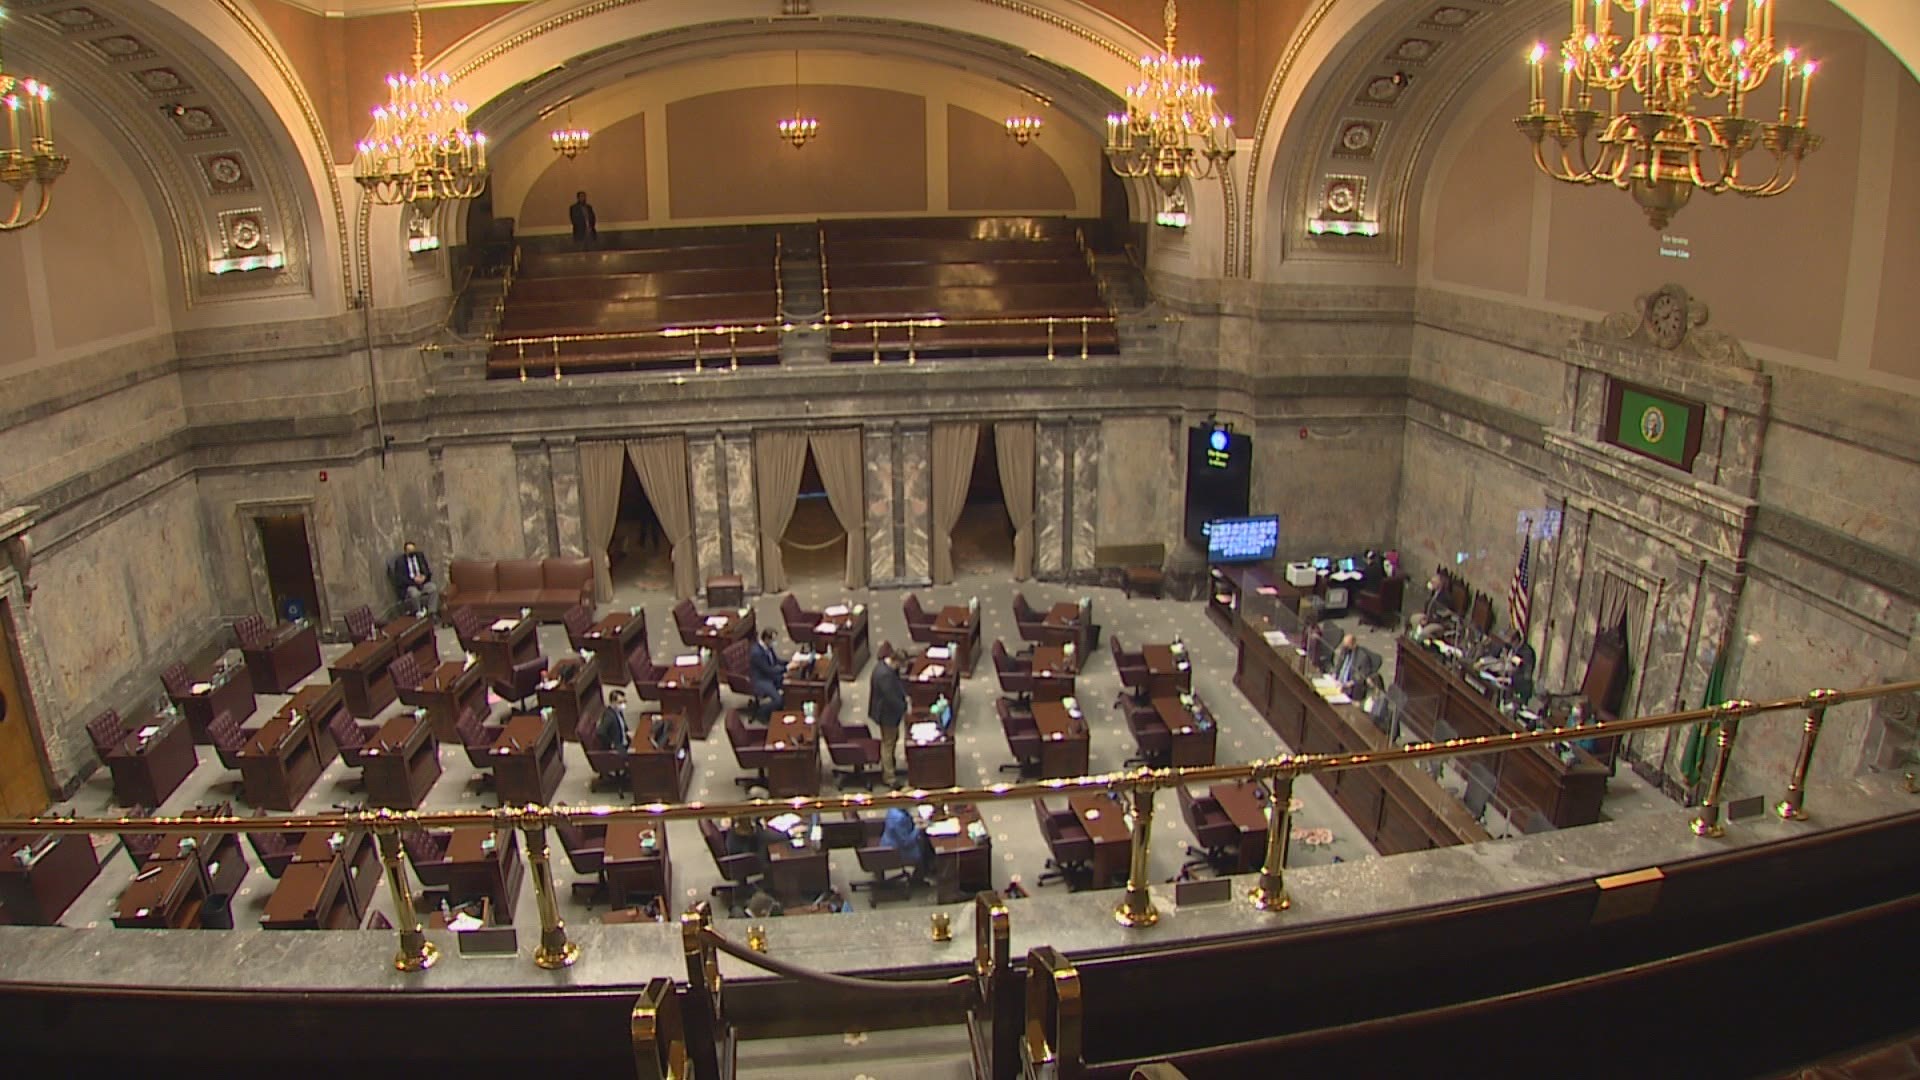 It was a busy week in the Washington state Legislature, with several bills not advancing, and the governor making some big announcements about COVID-19 restrictions.